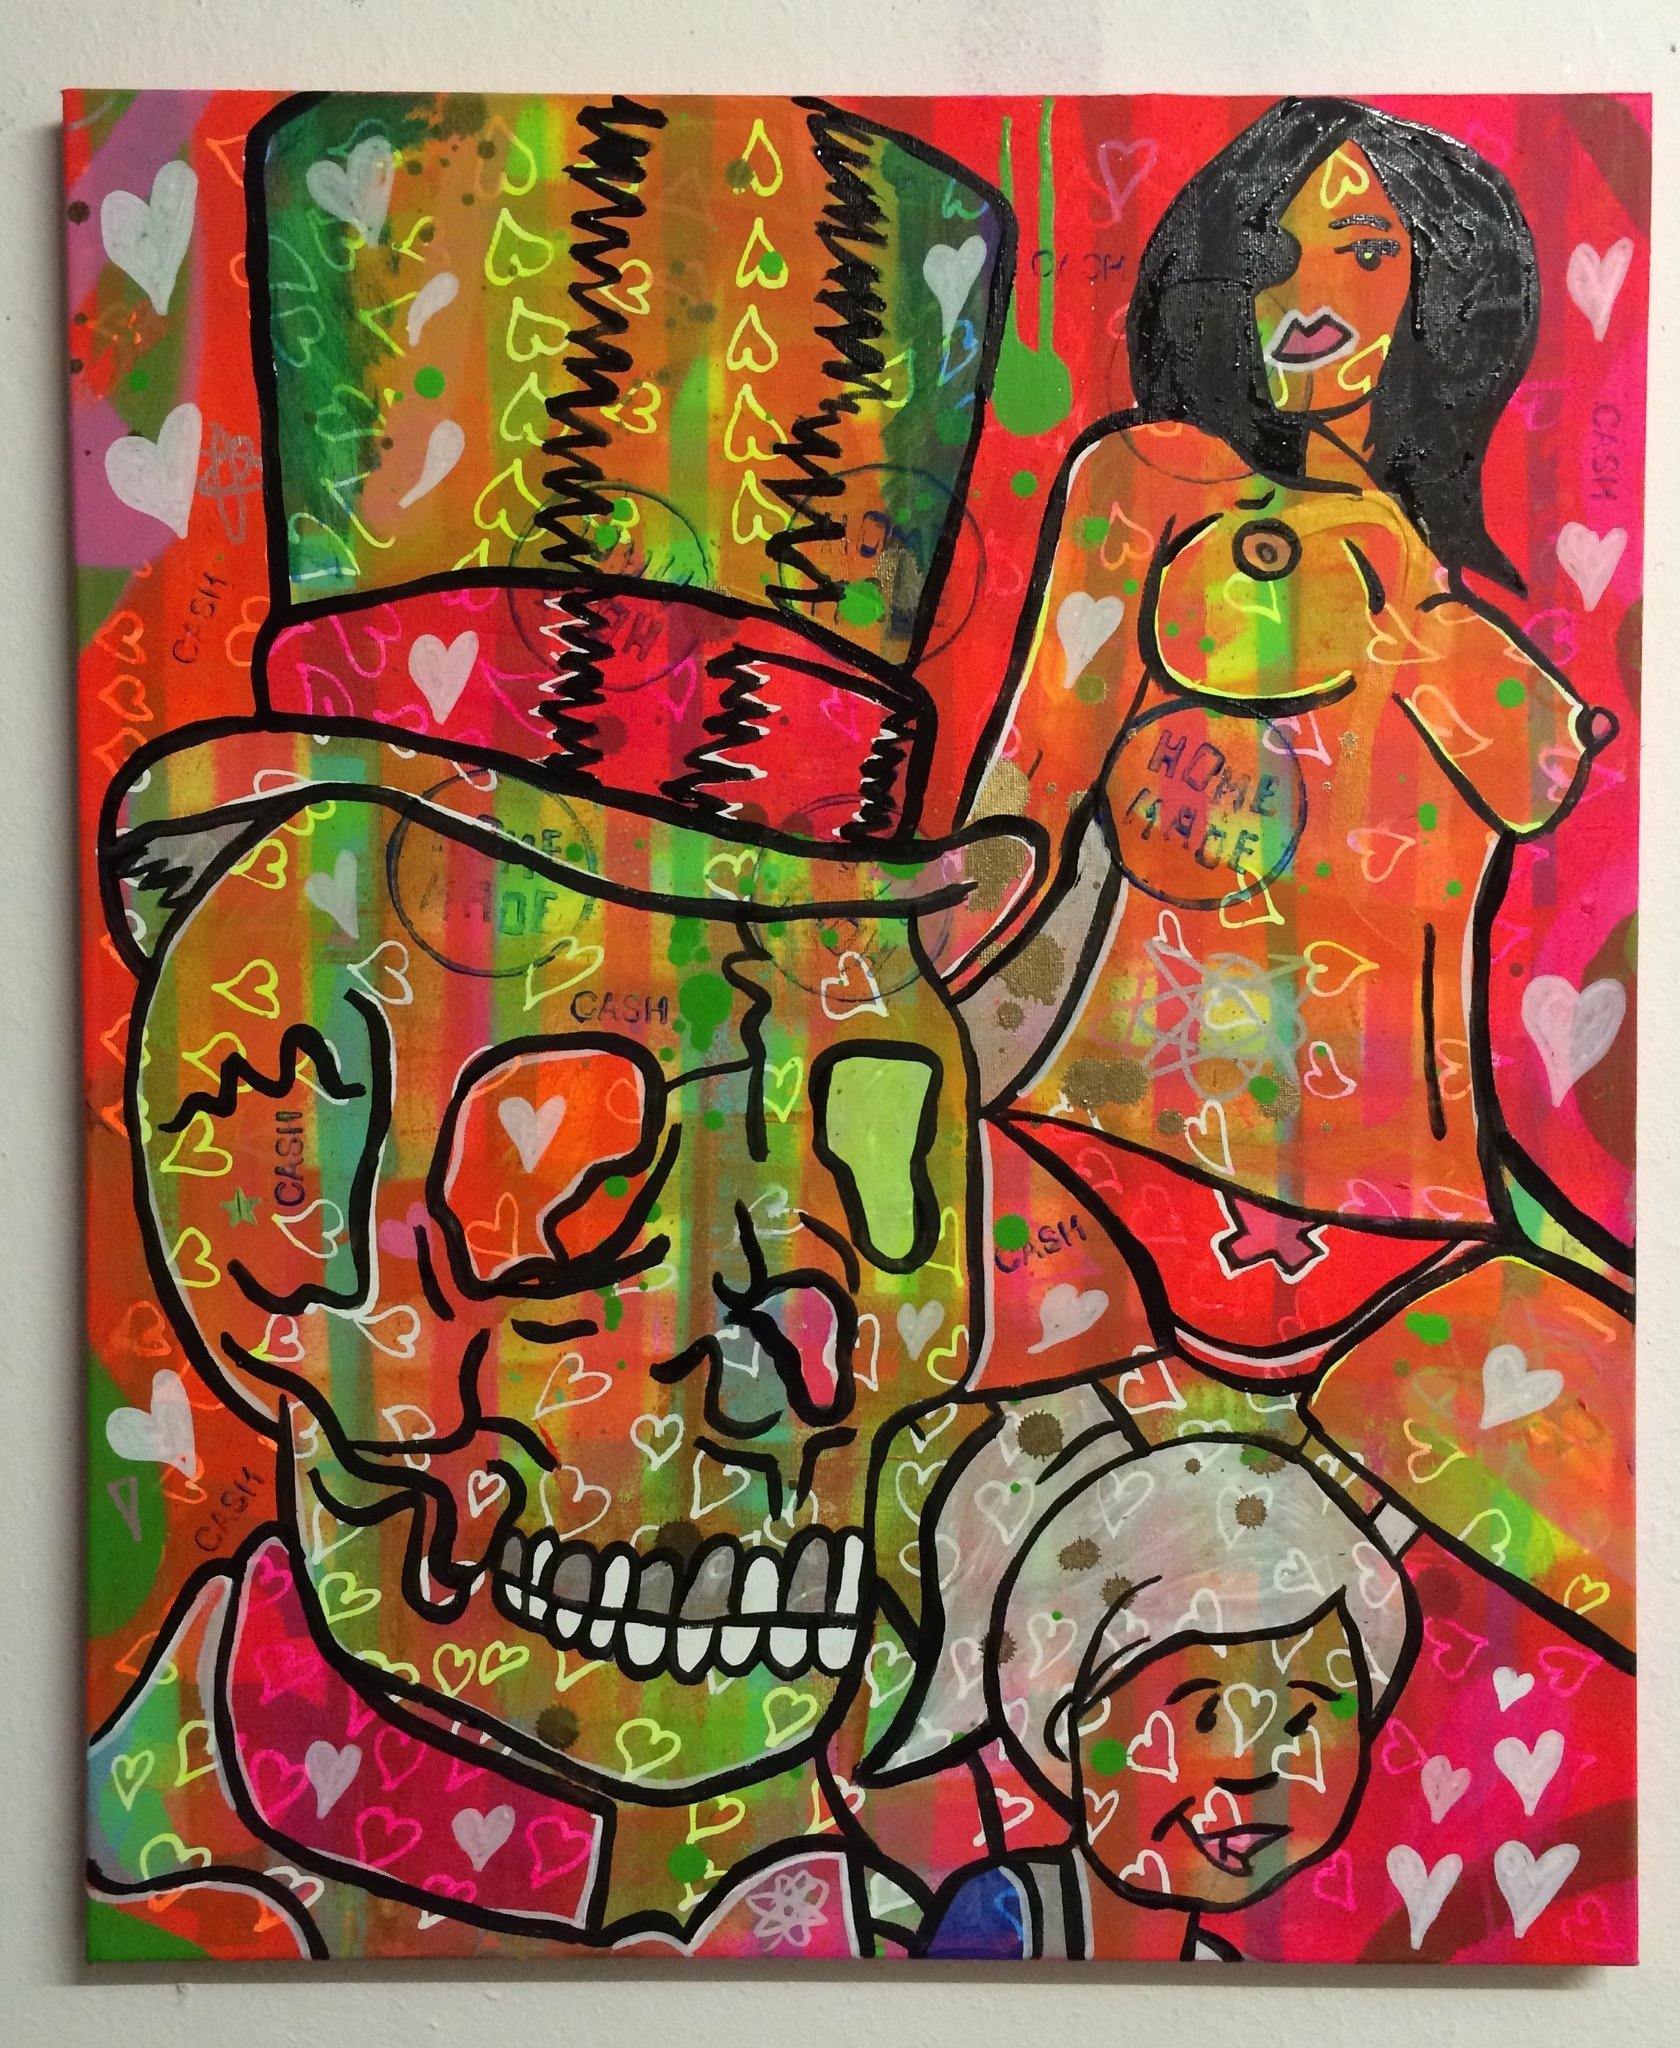 Hot Sauce fairtrade by Barrie J Davies 2015, Mixed media on Canvas, 50cm x 60cm, Unframed. Barrie J Davies is an Artist - Pop Art and Street art inspired Artist based in Brighton England UK - Pop Art Paintings, Street Art Prints & Editions available.